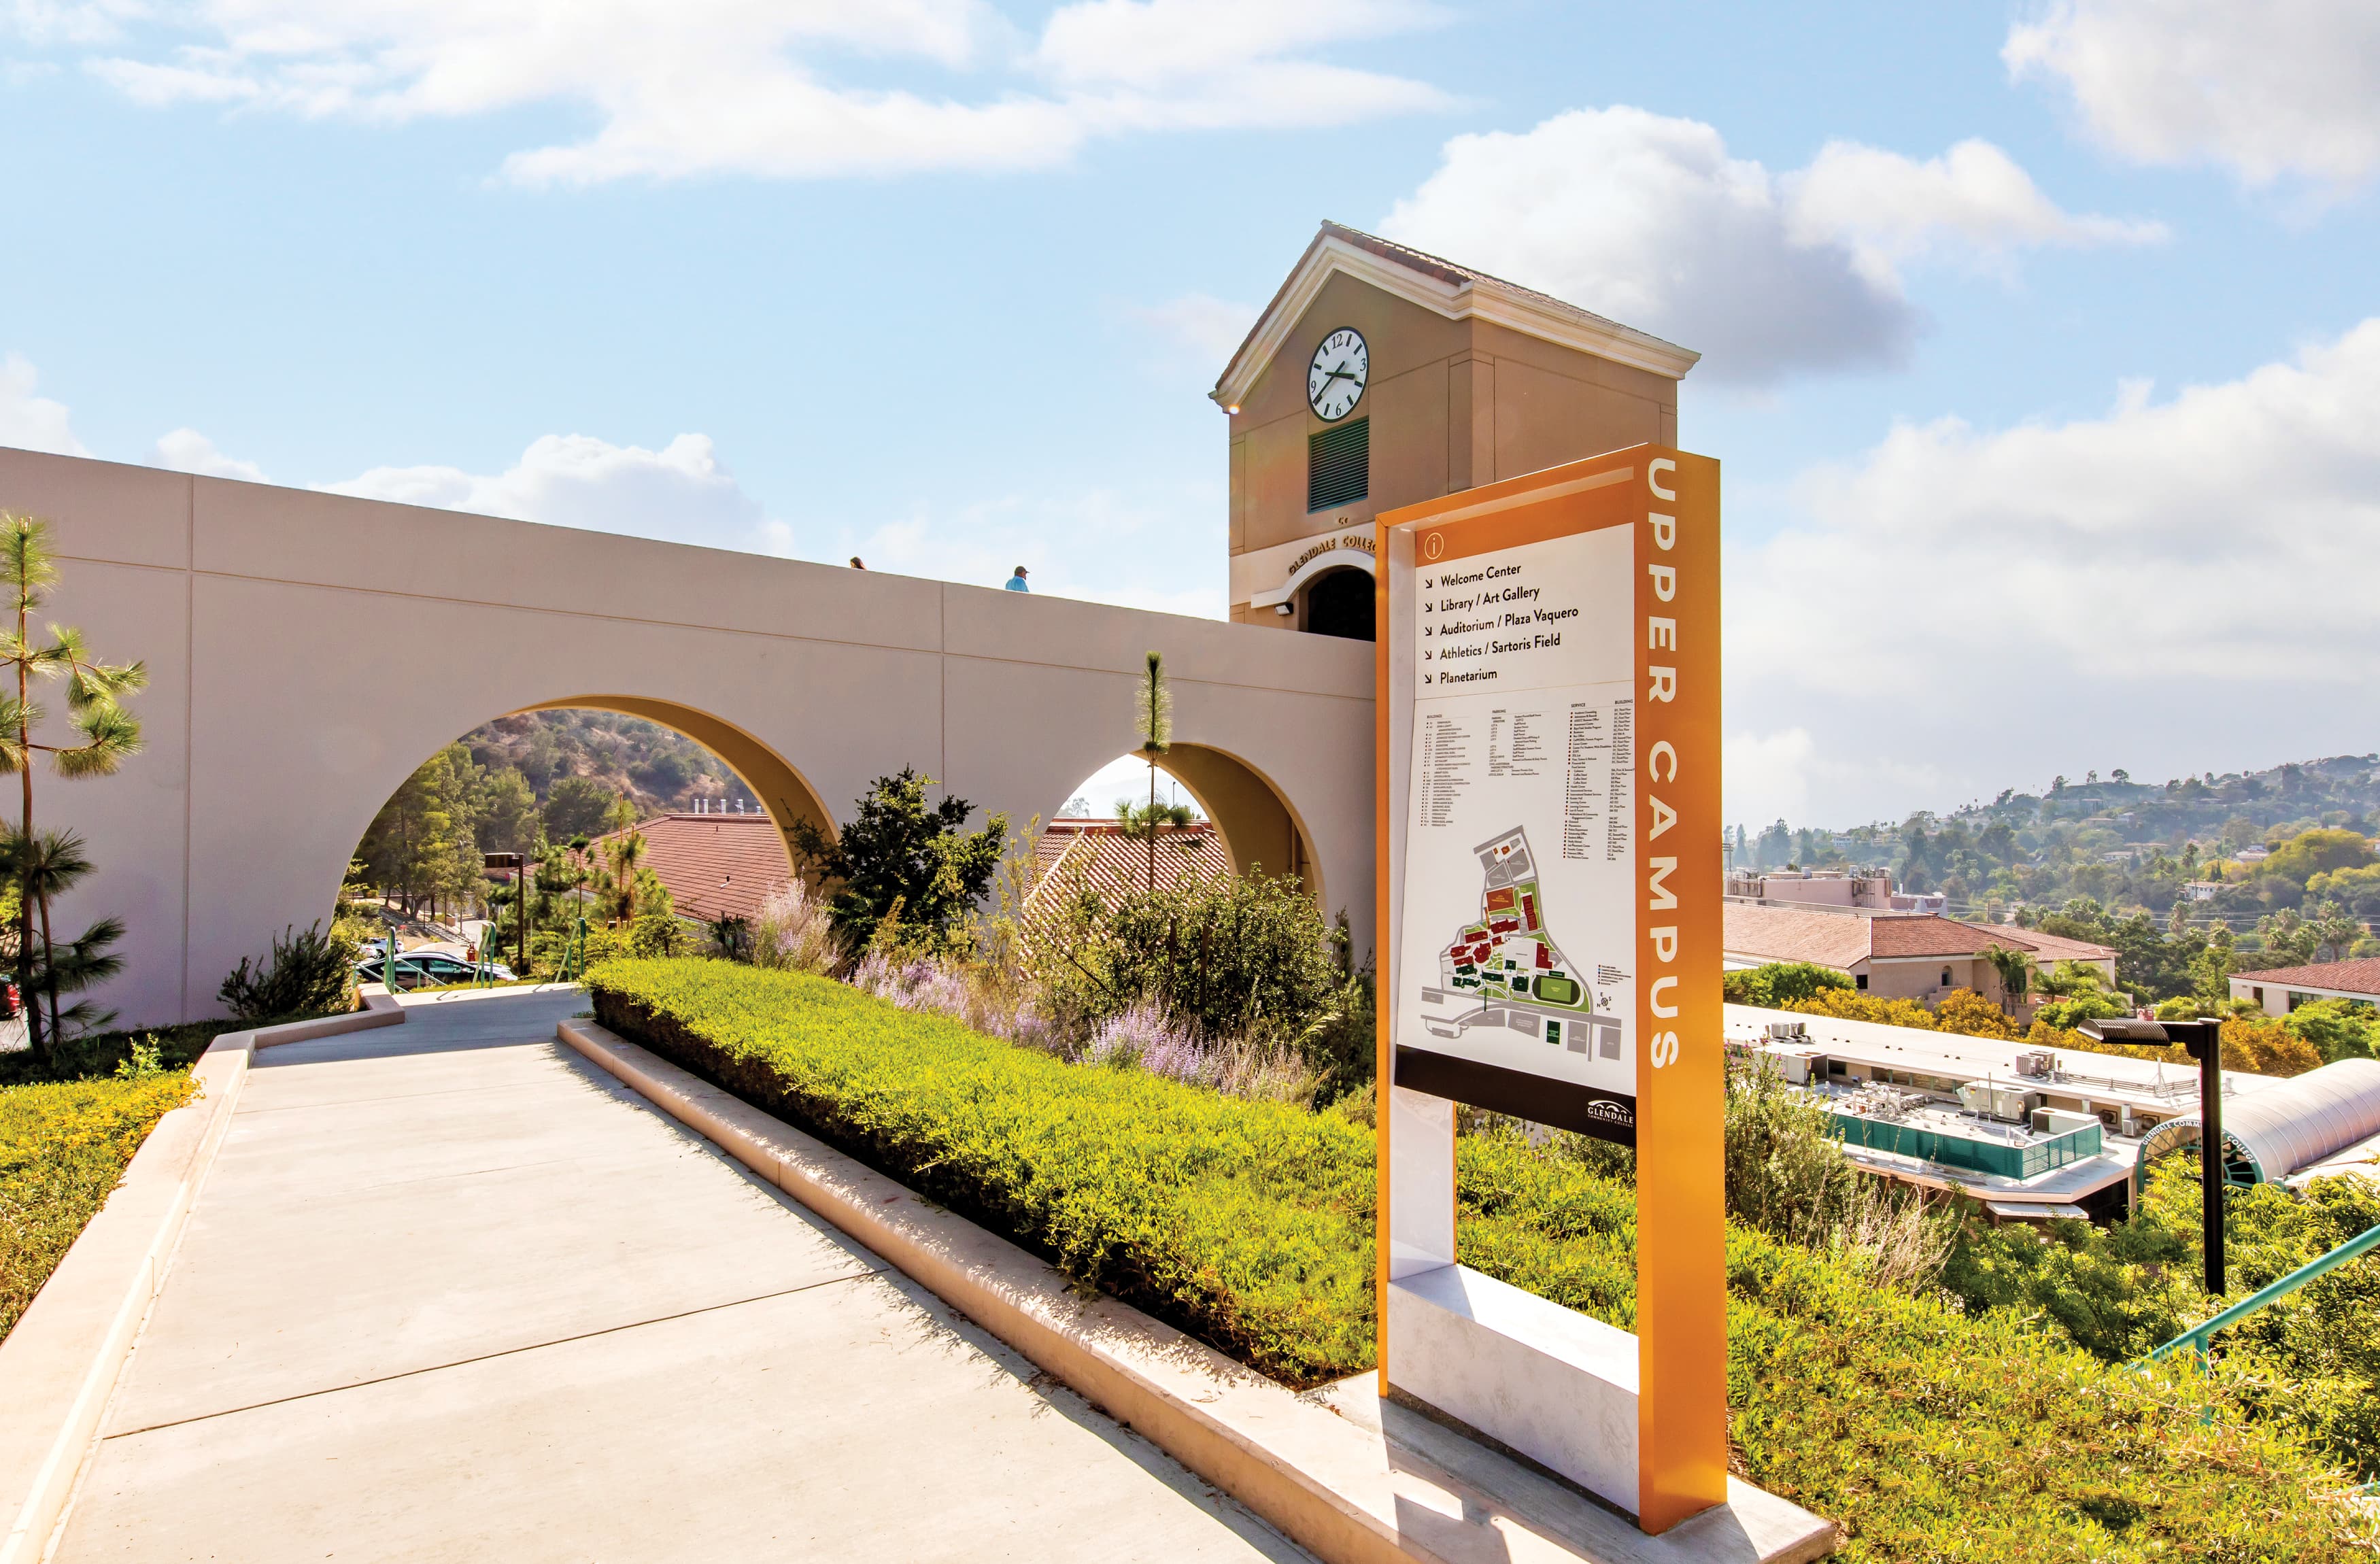 Orange map directional for the Upper Campus for Glendale Community College